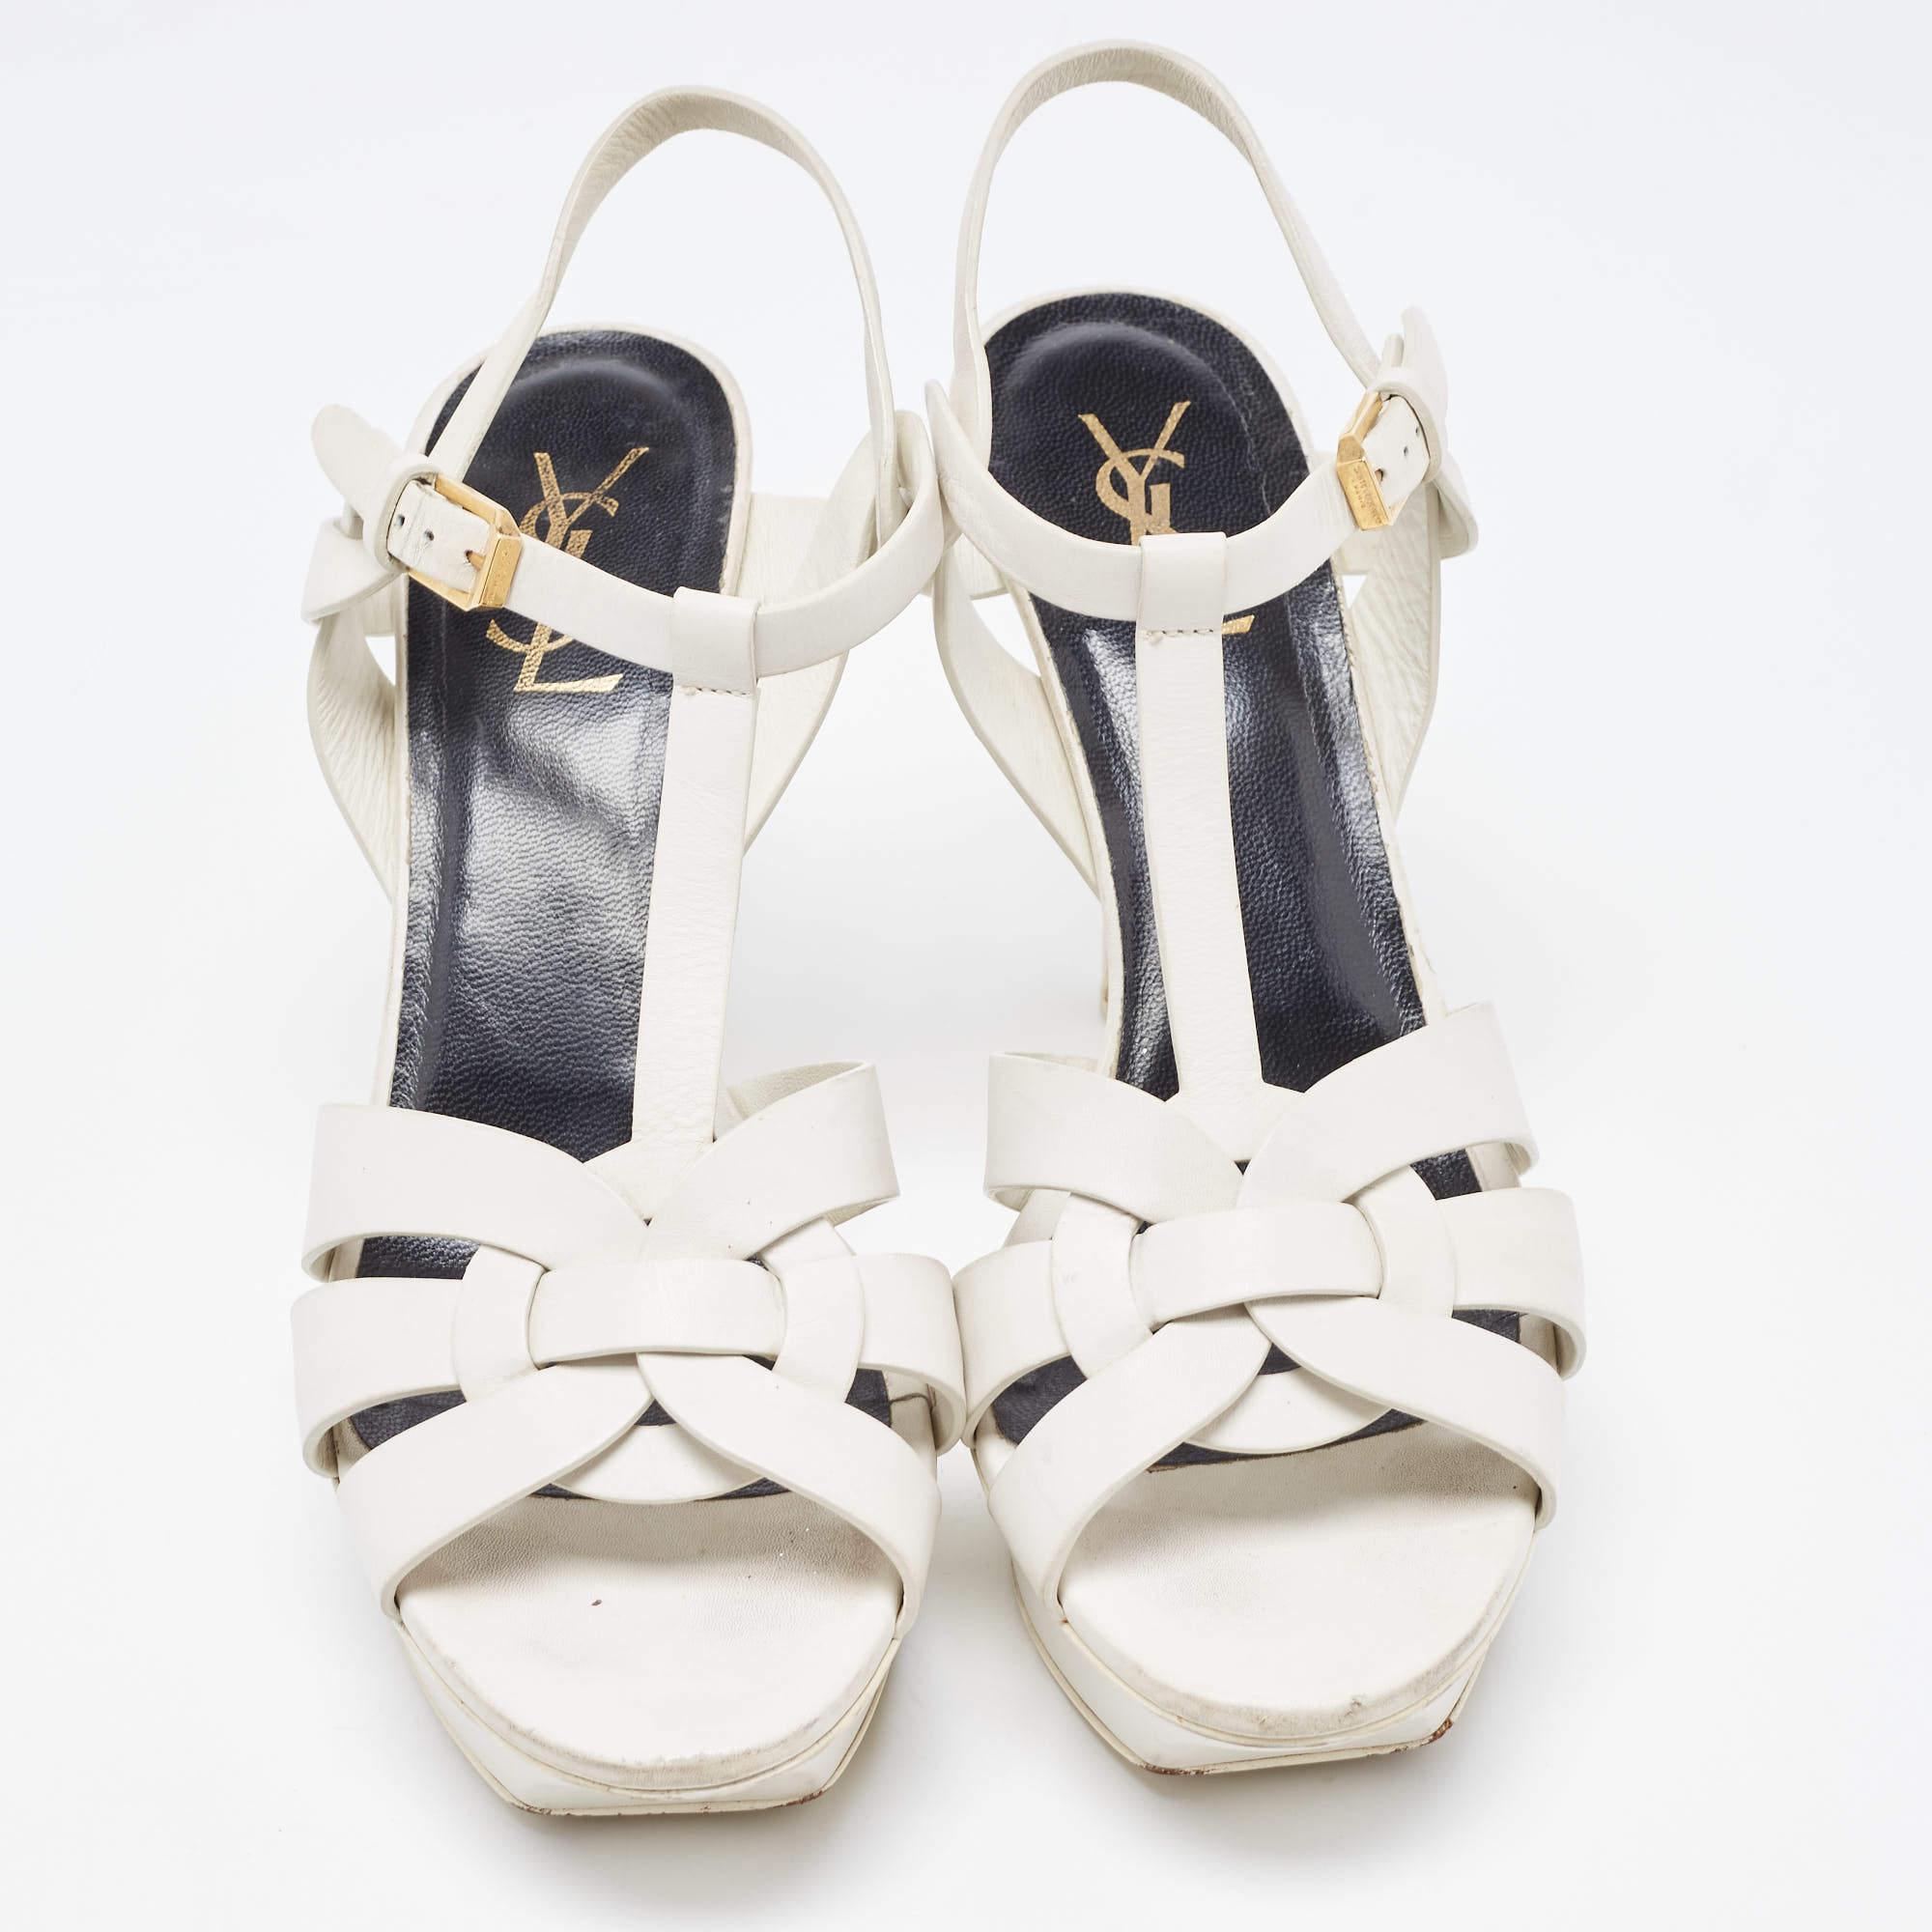 One of the most celebrated designs from Saint Laurent is their Tribute sandals. They are preferred by the fashion elite worldwide because of their practicality, and this white creation is no different. Created from leather, the pair flaunts an